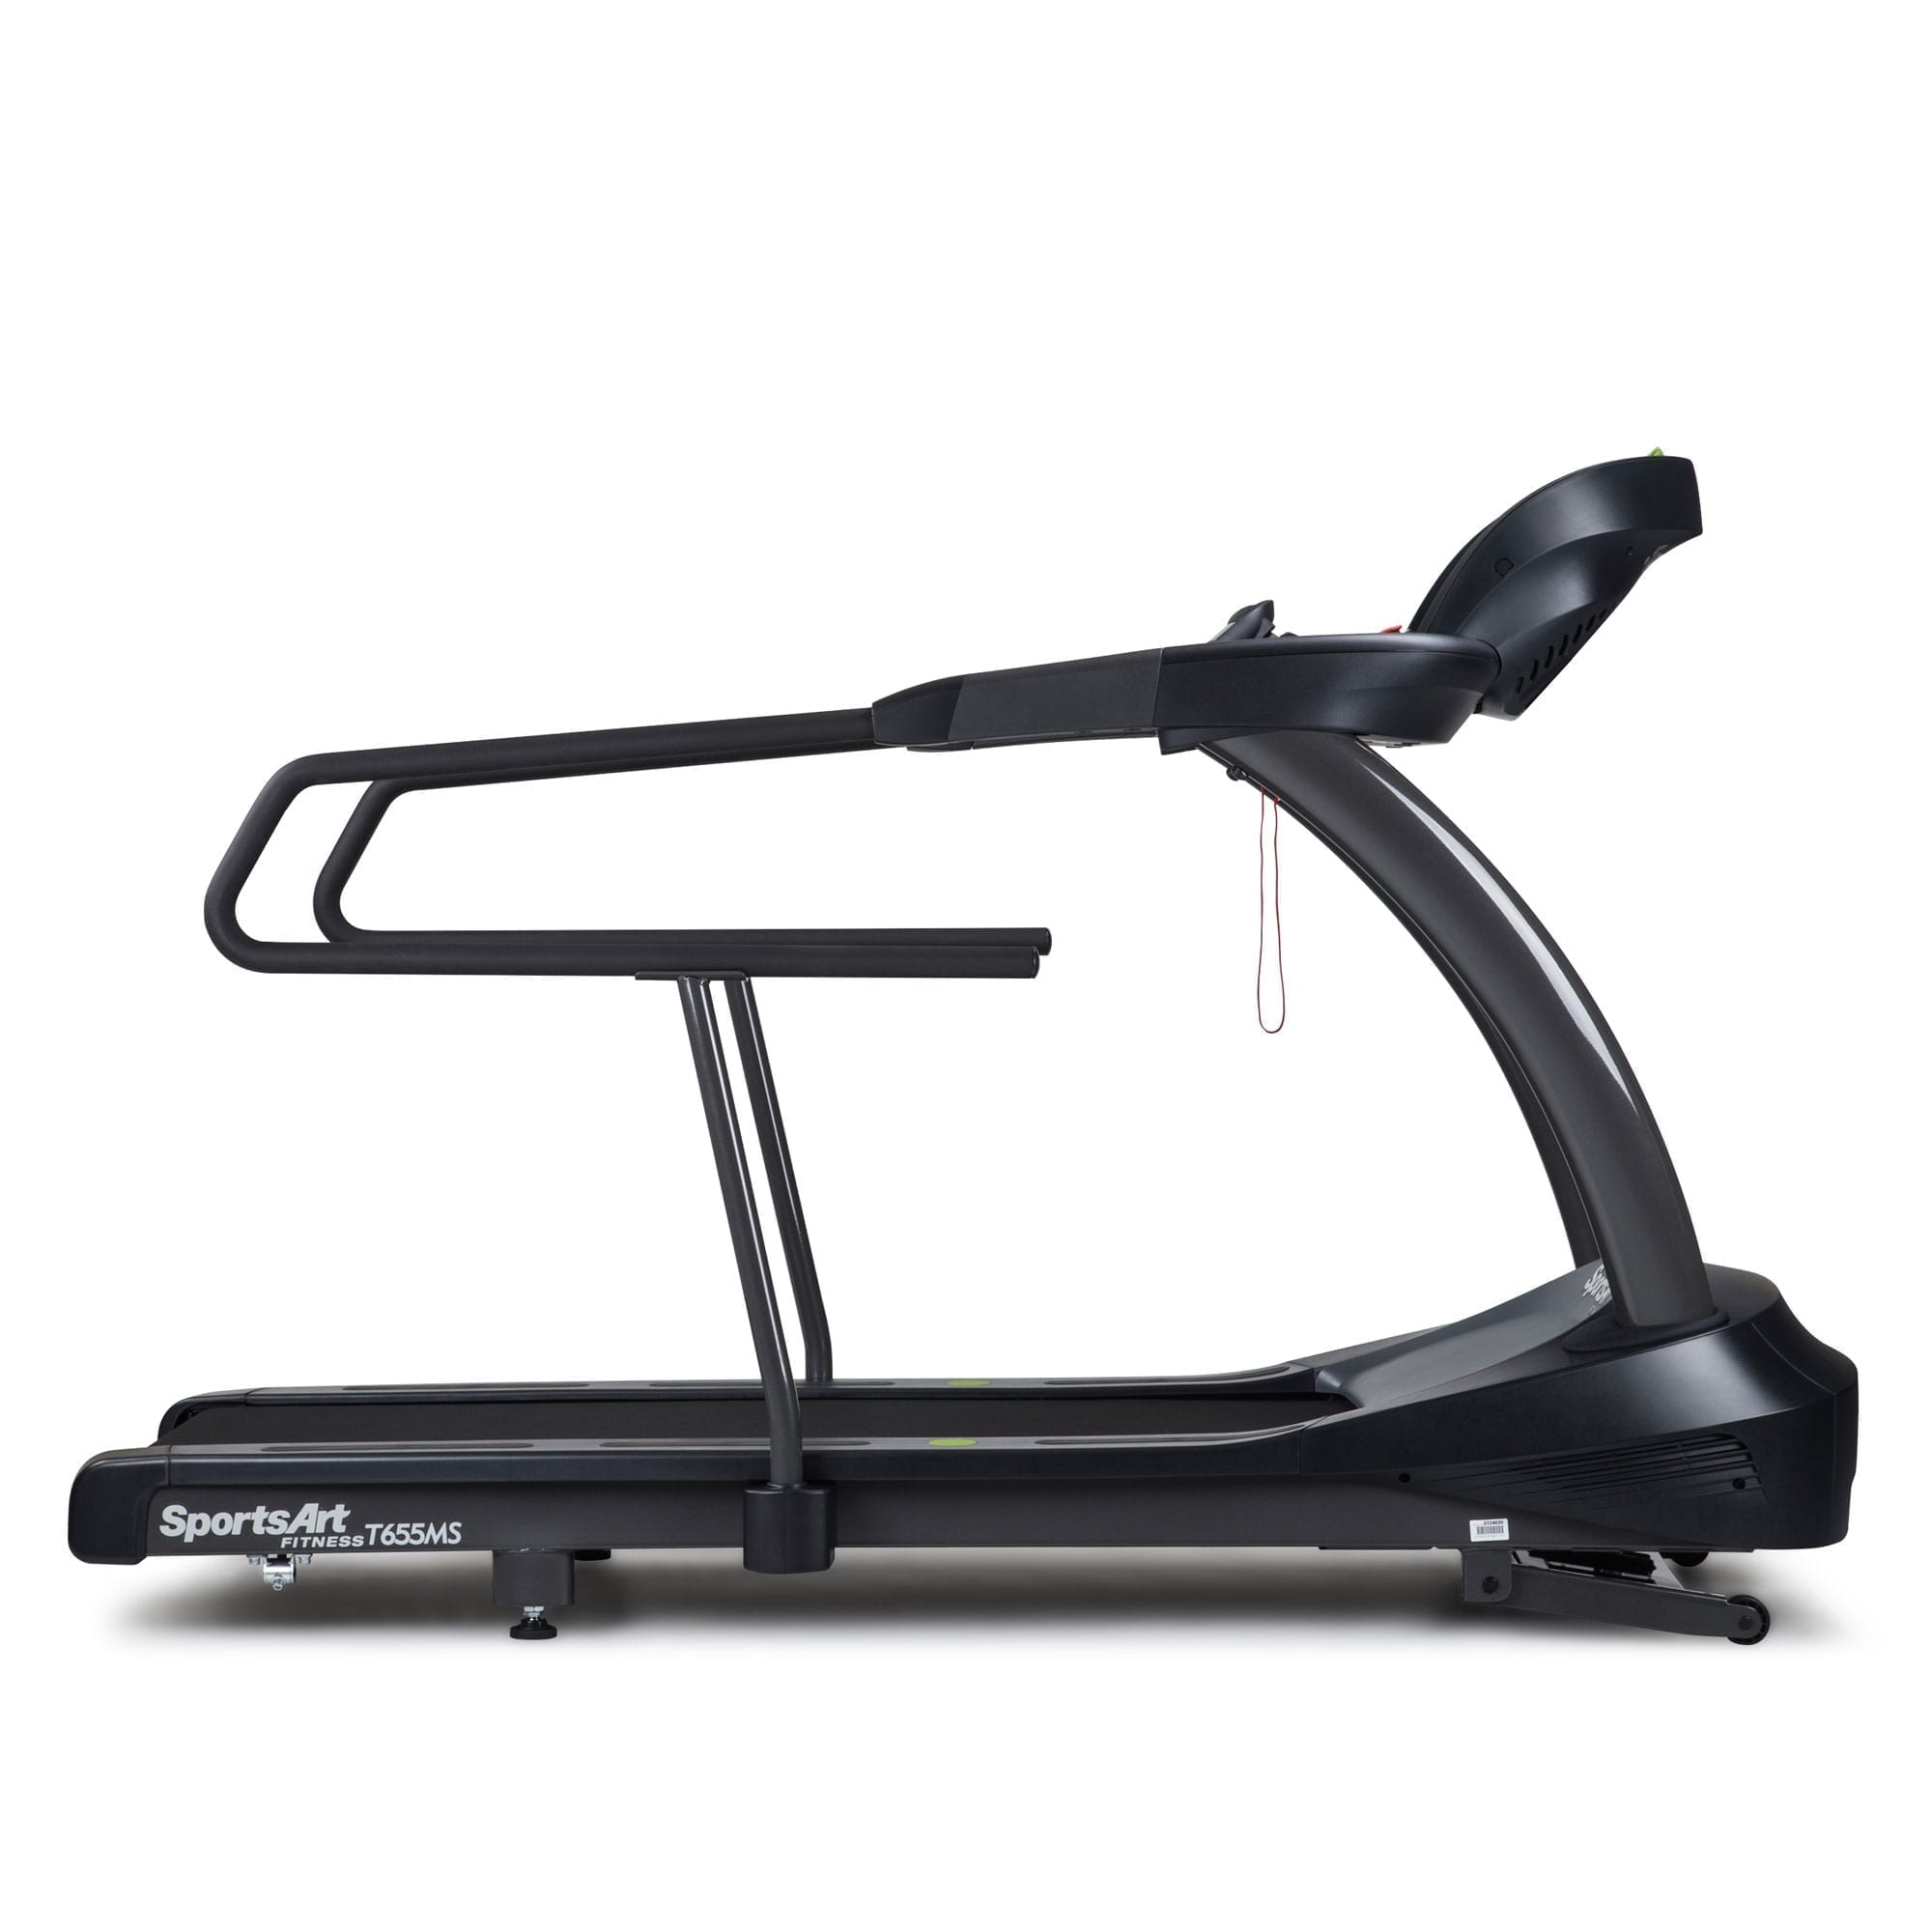 SportsArts Medical Treadmill T655MS side view with console toward the right hand side 